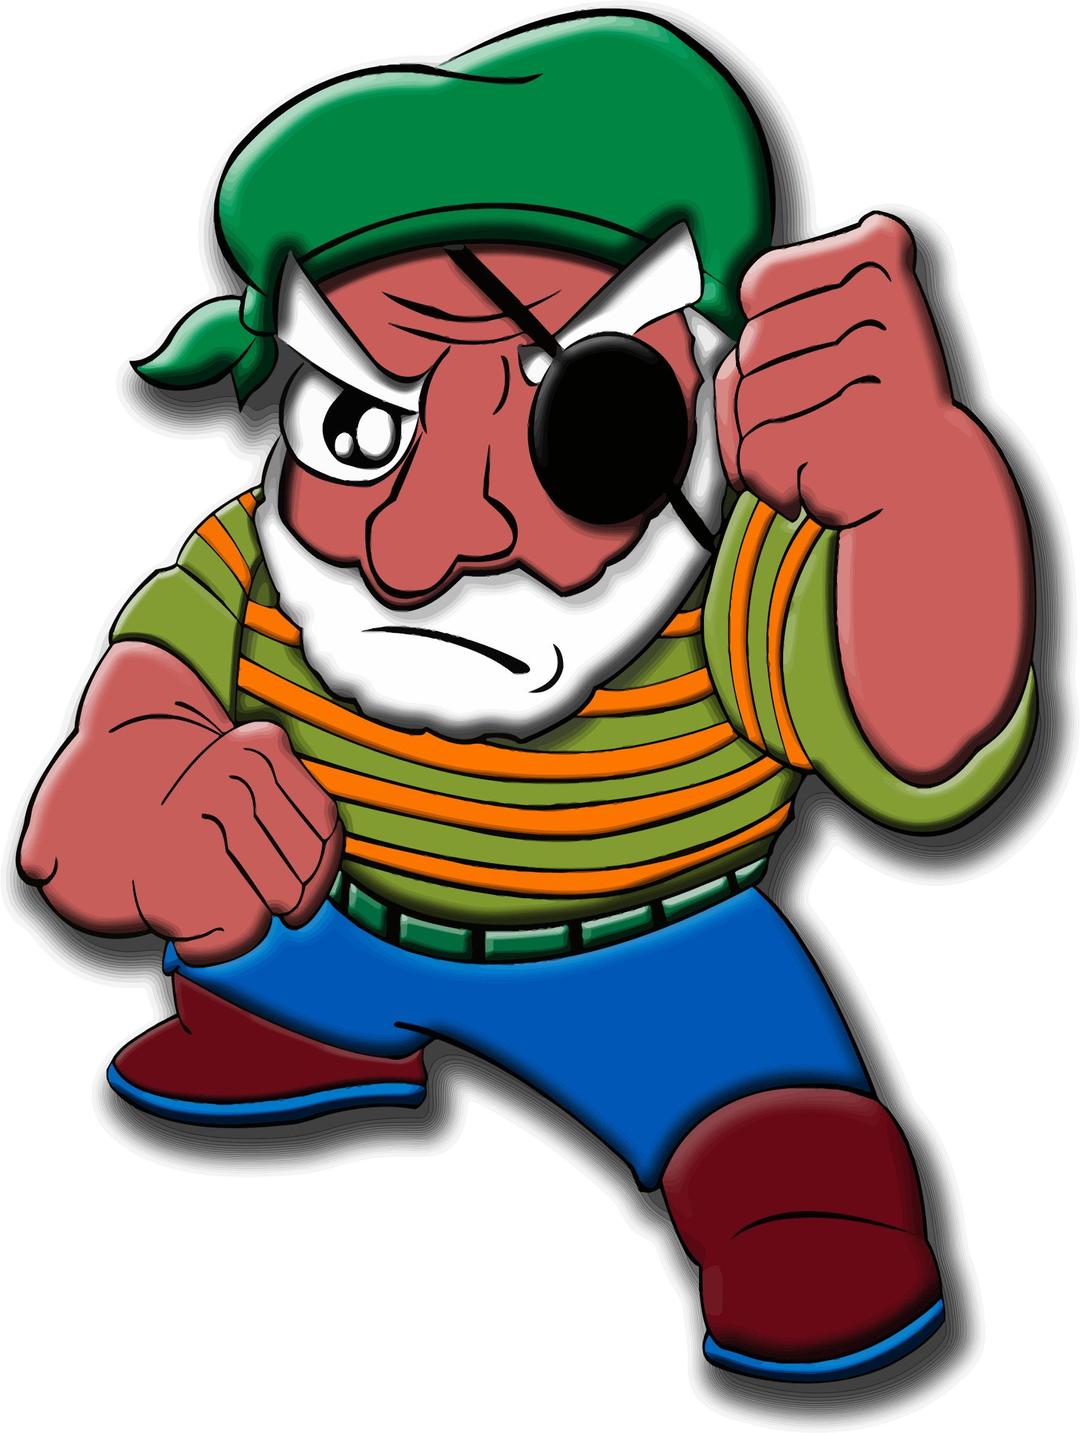 Old Man With Eye Patch png transparent